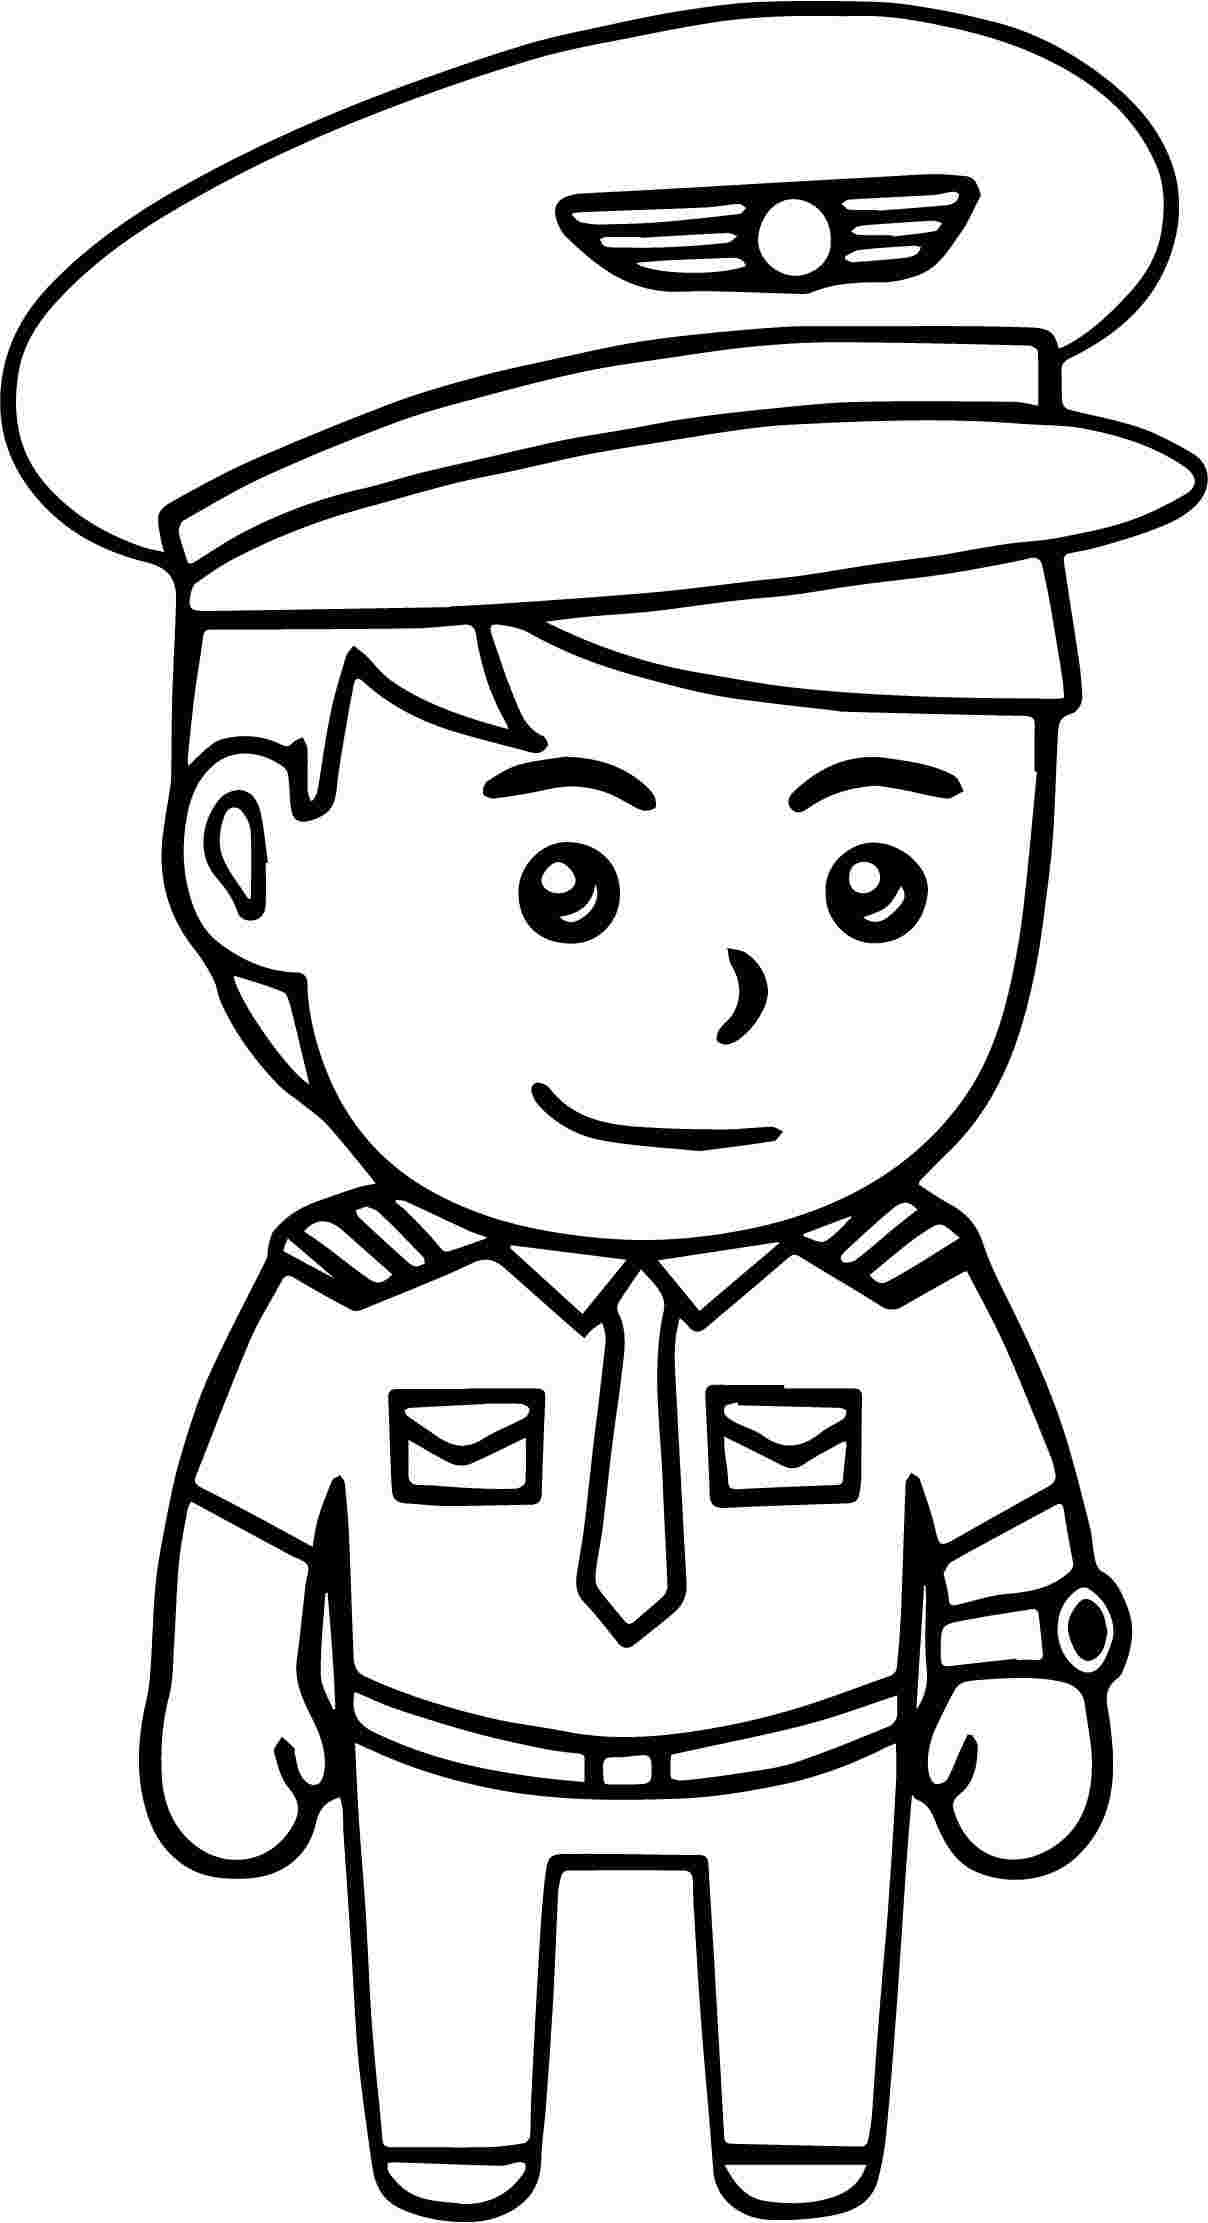 Pilot Coloring Pages   Coloring Home